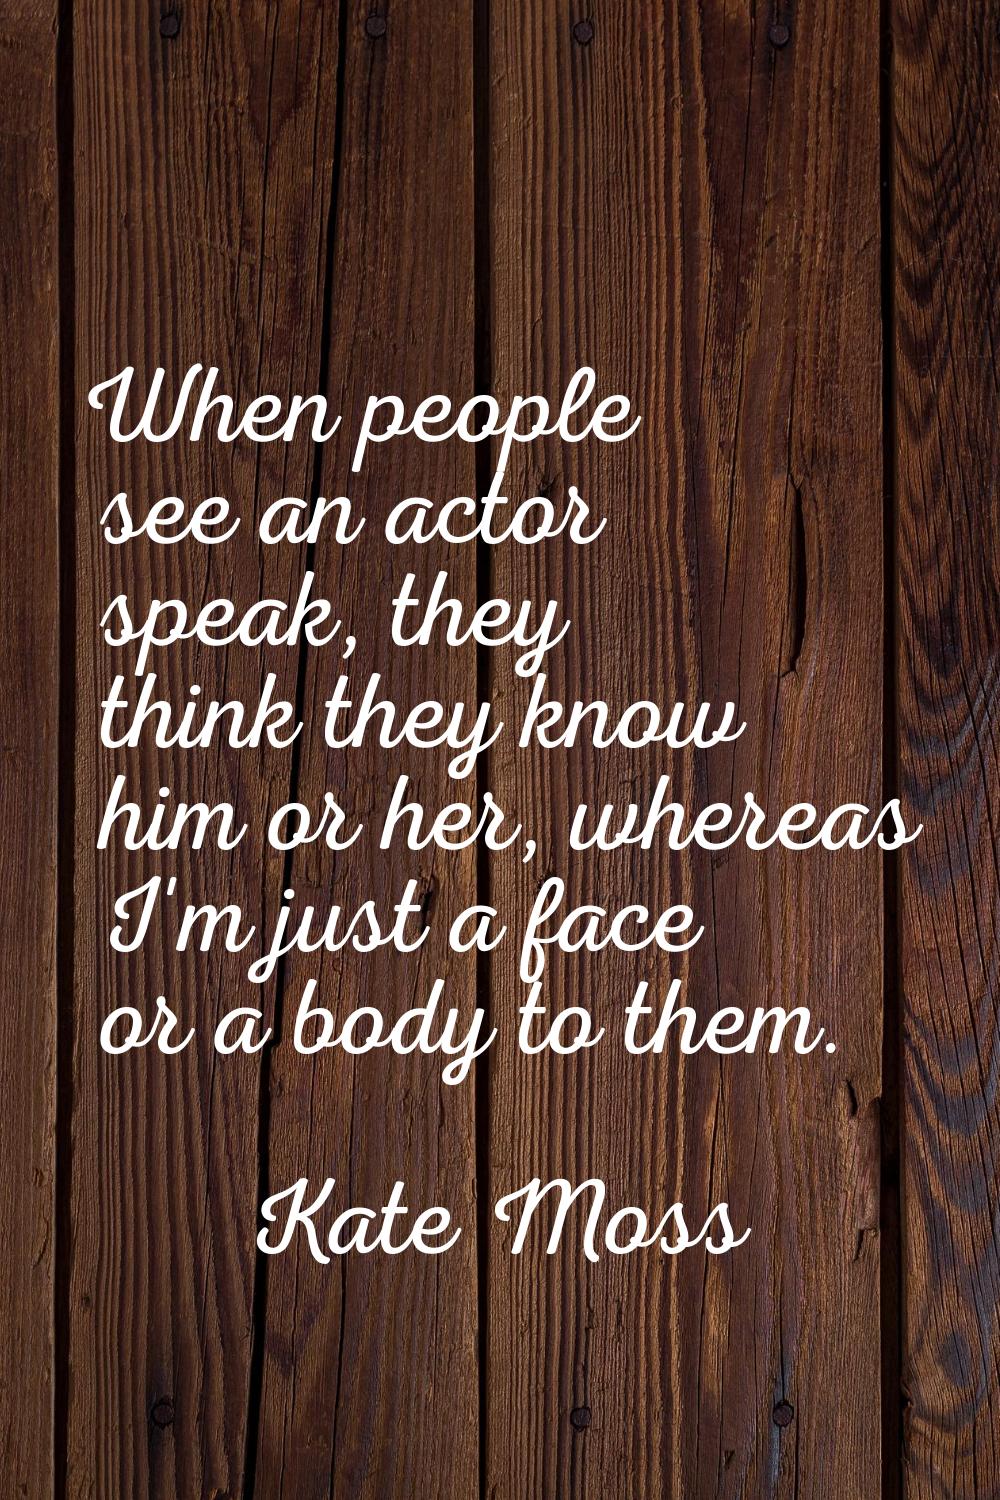 When people see an actor speak, they think they know him or her, whereas I'm just a face or a body 